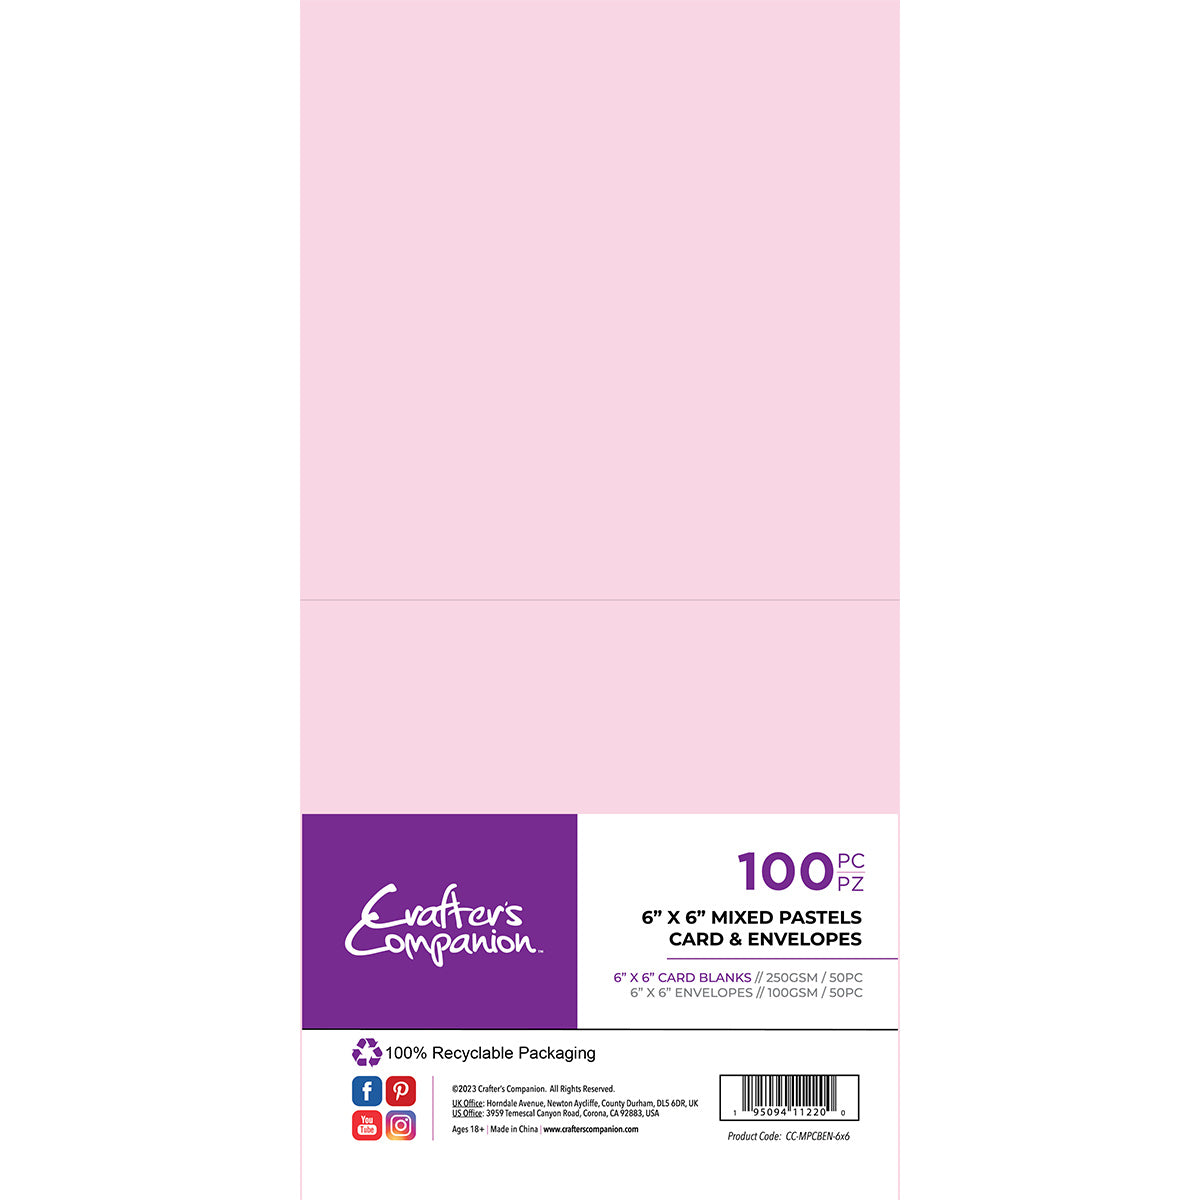 Crafter's Companion - 6"x 6" Card & Envelopes 100 piece - Mixed Pastels